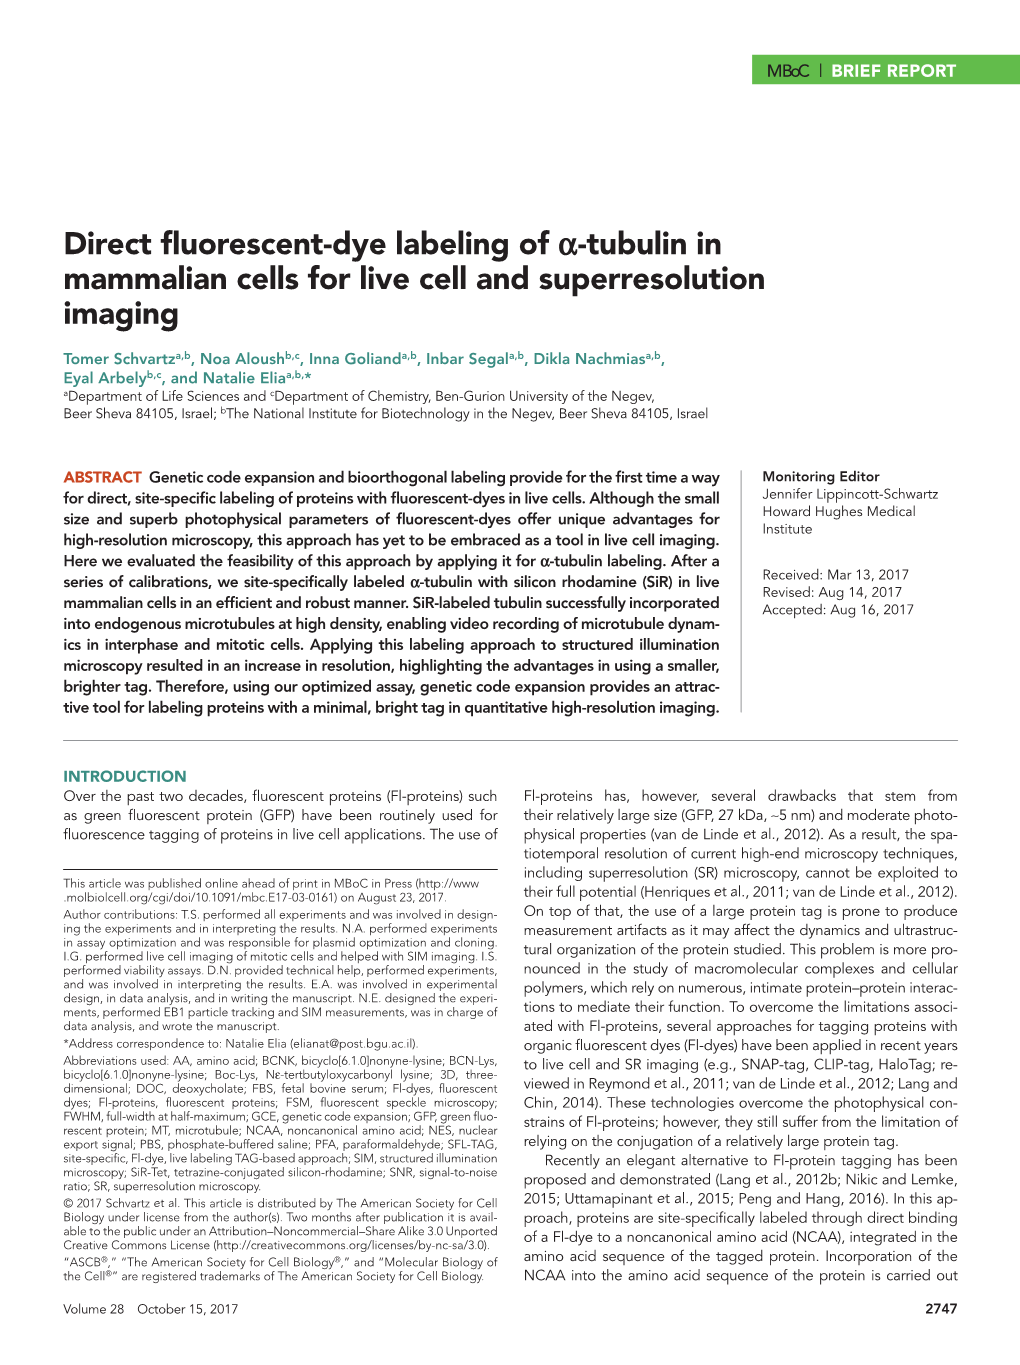 Direct Fluorescent-Dye Labeling of Α-Tubulin in Mammalian Cells for Live